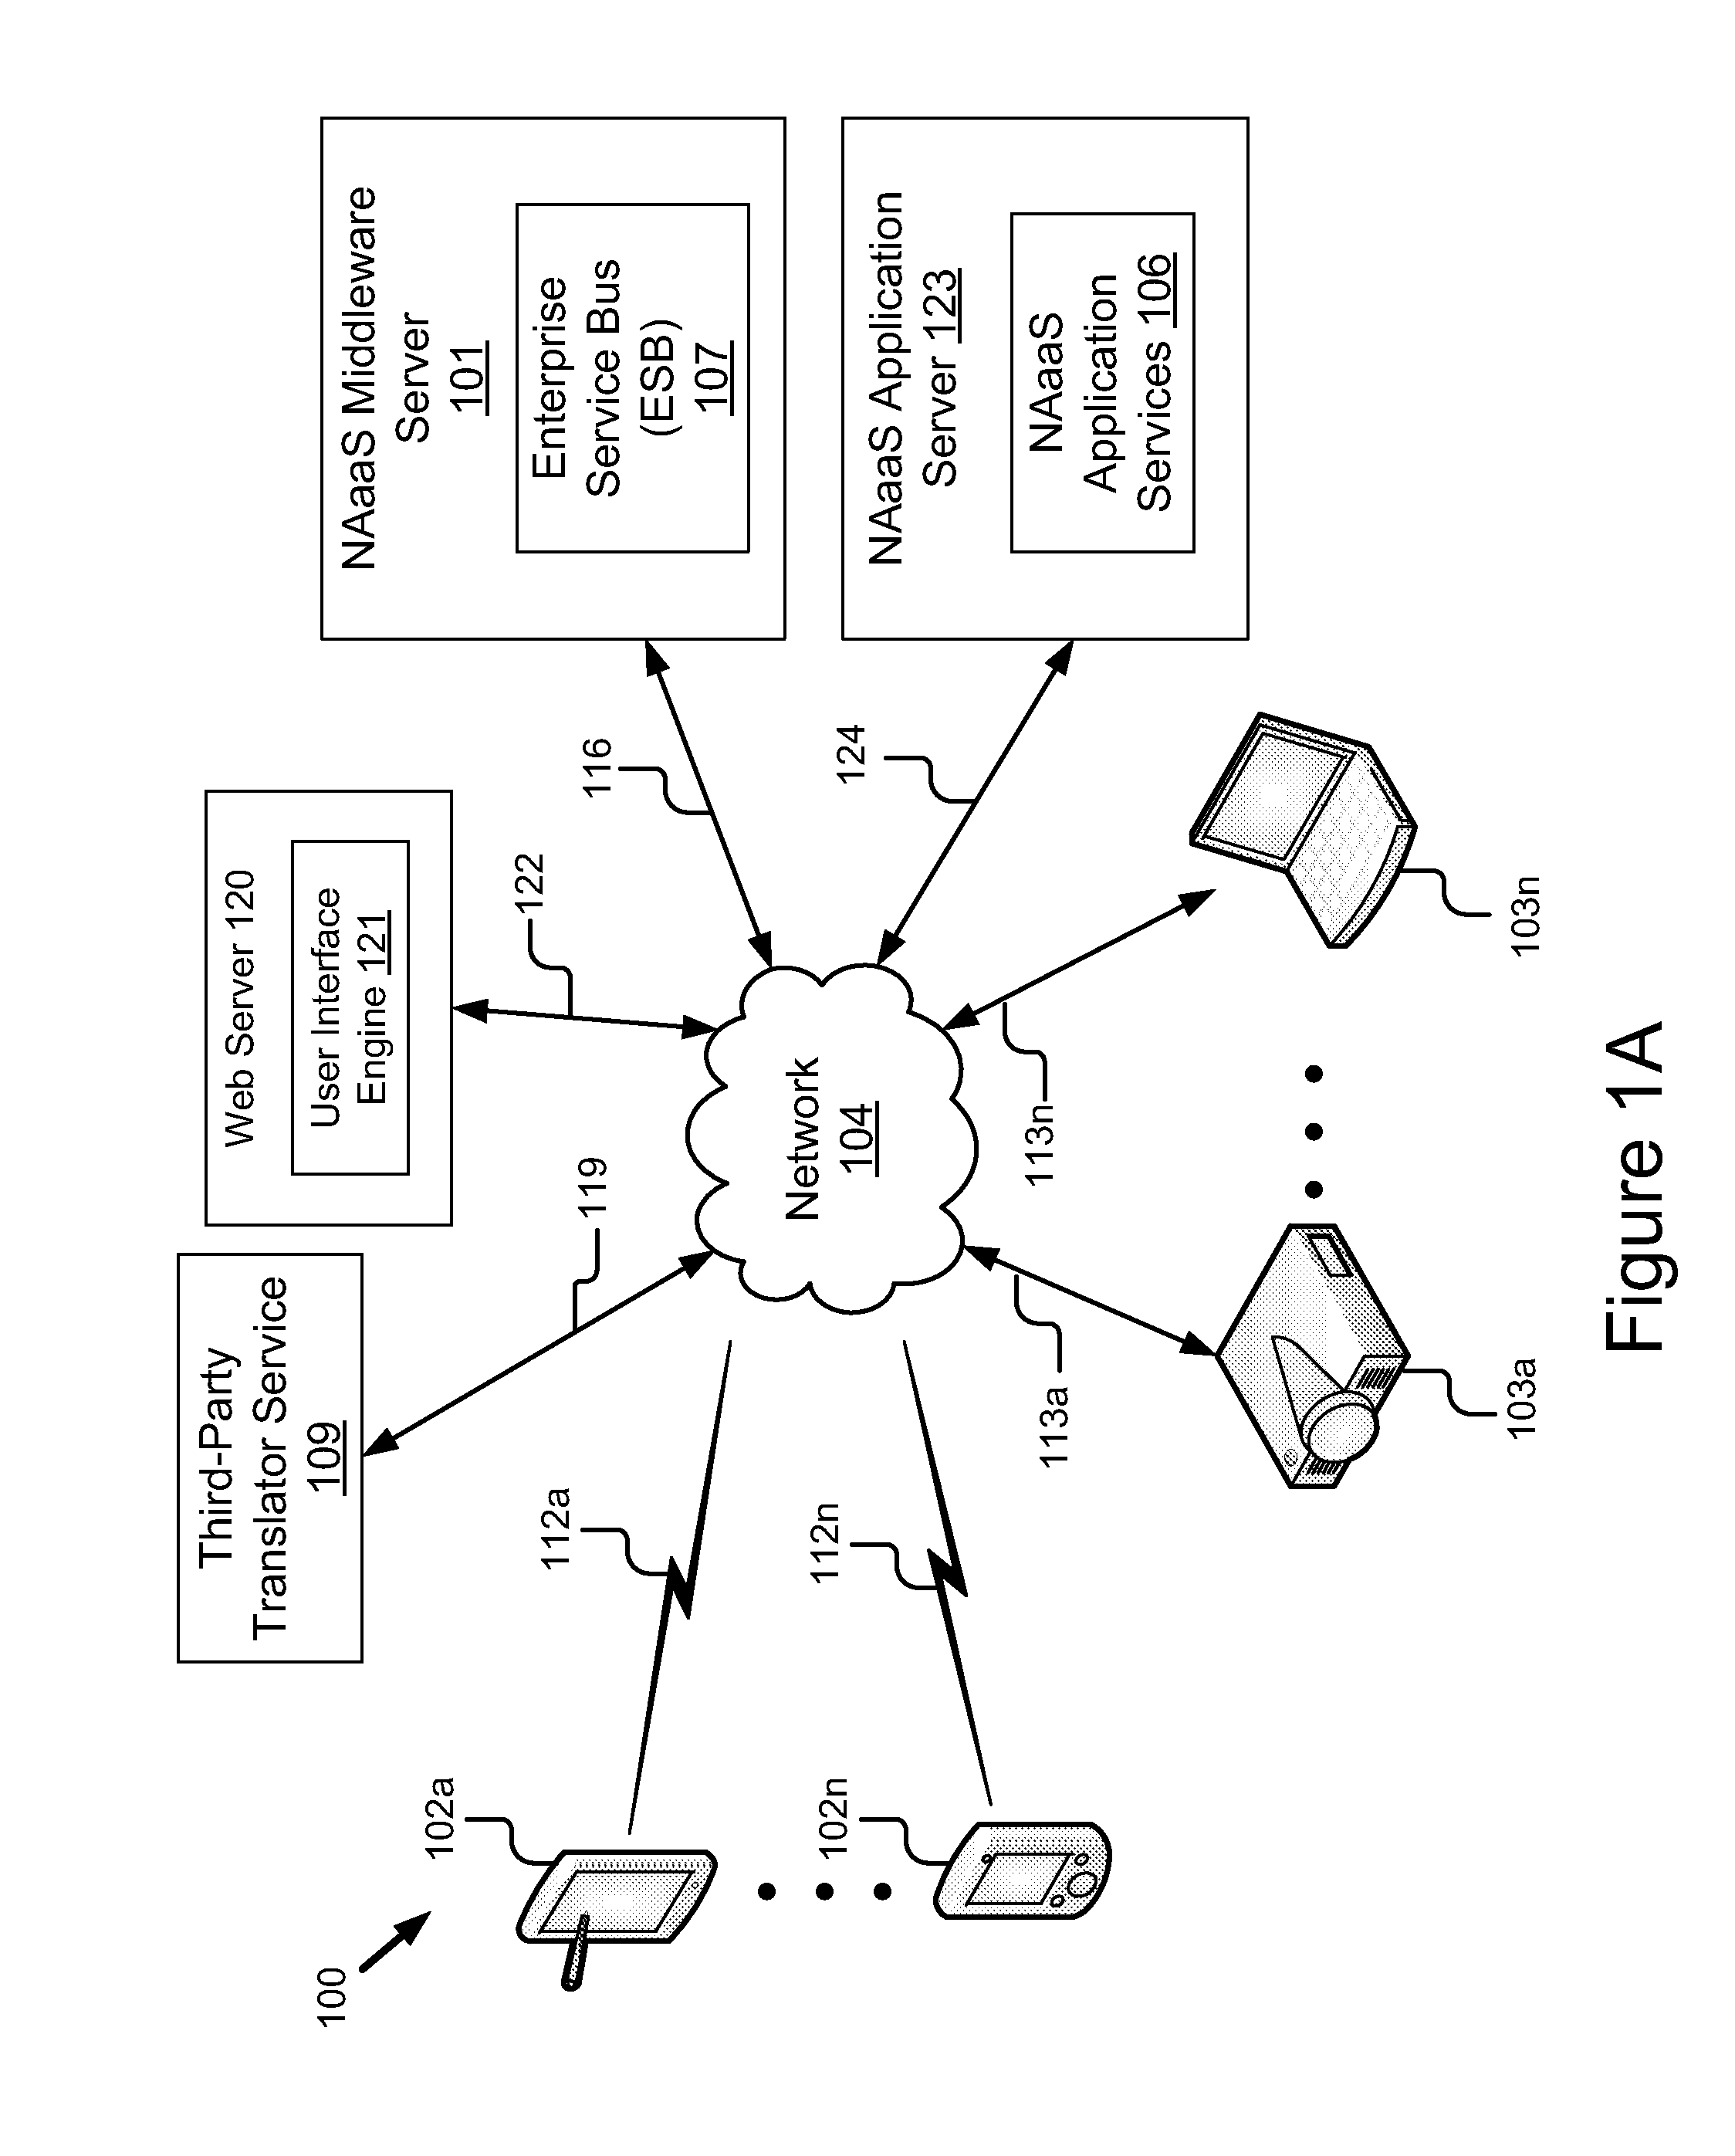 System and Method for Translating Content between Devices